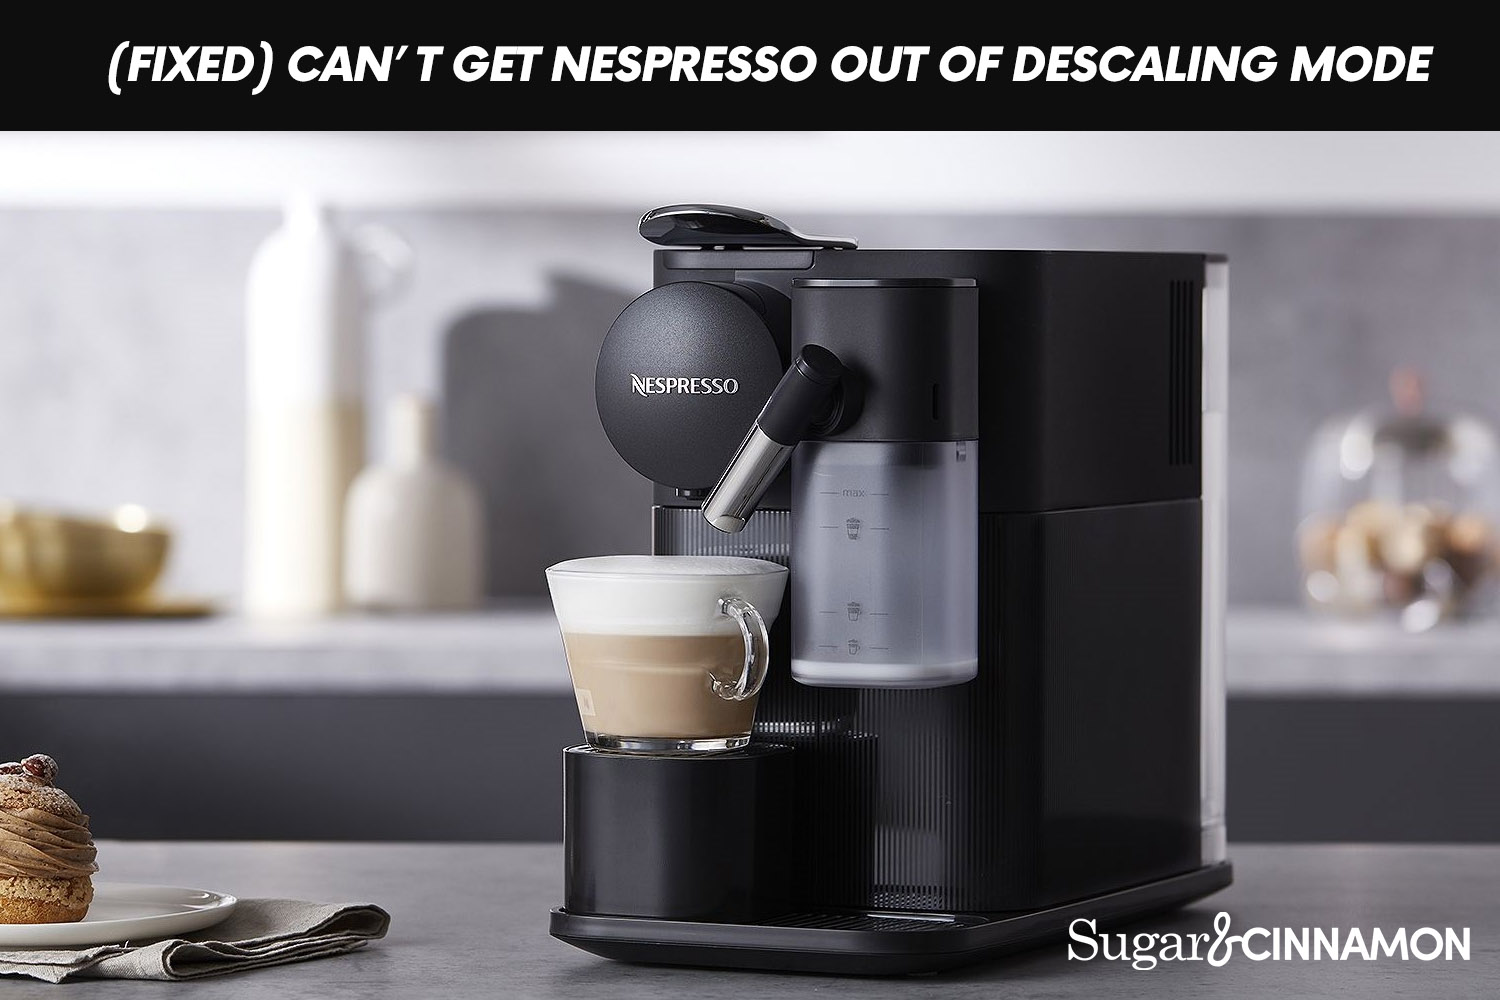 Egypten vogn tidevand FIXED) Can't Get Nespresso Out Of Descaling Mode Issue | SugarAndCinnamon